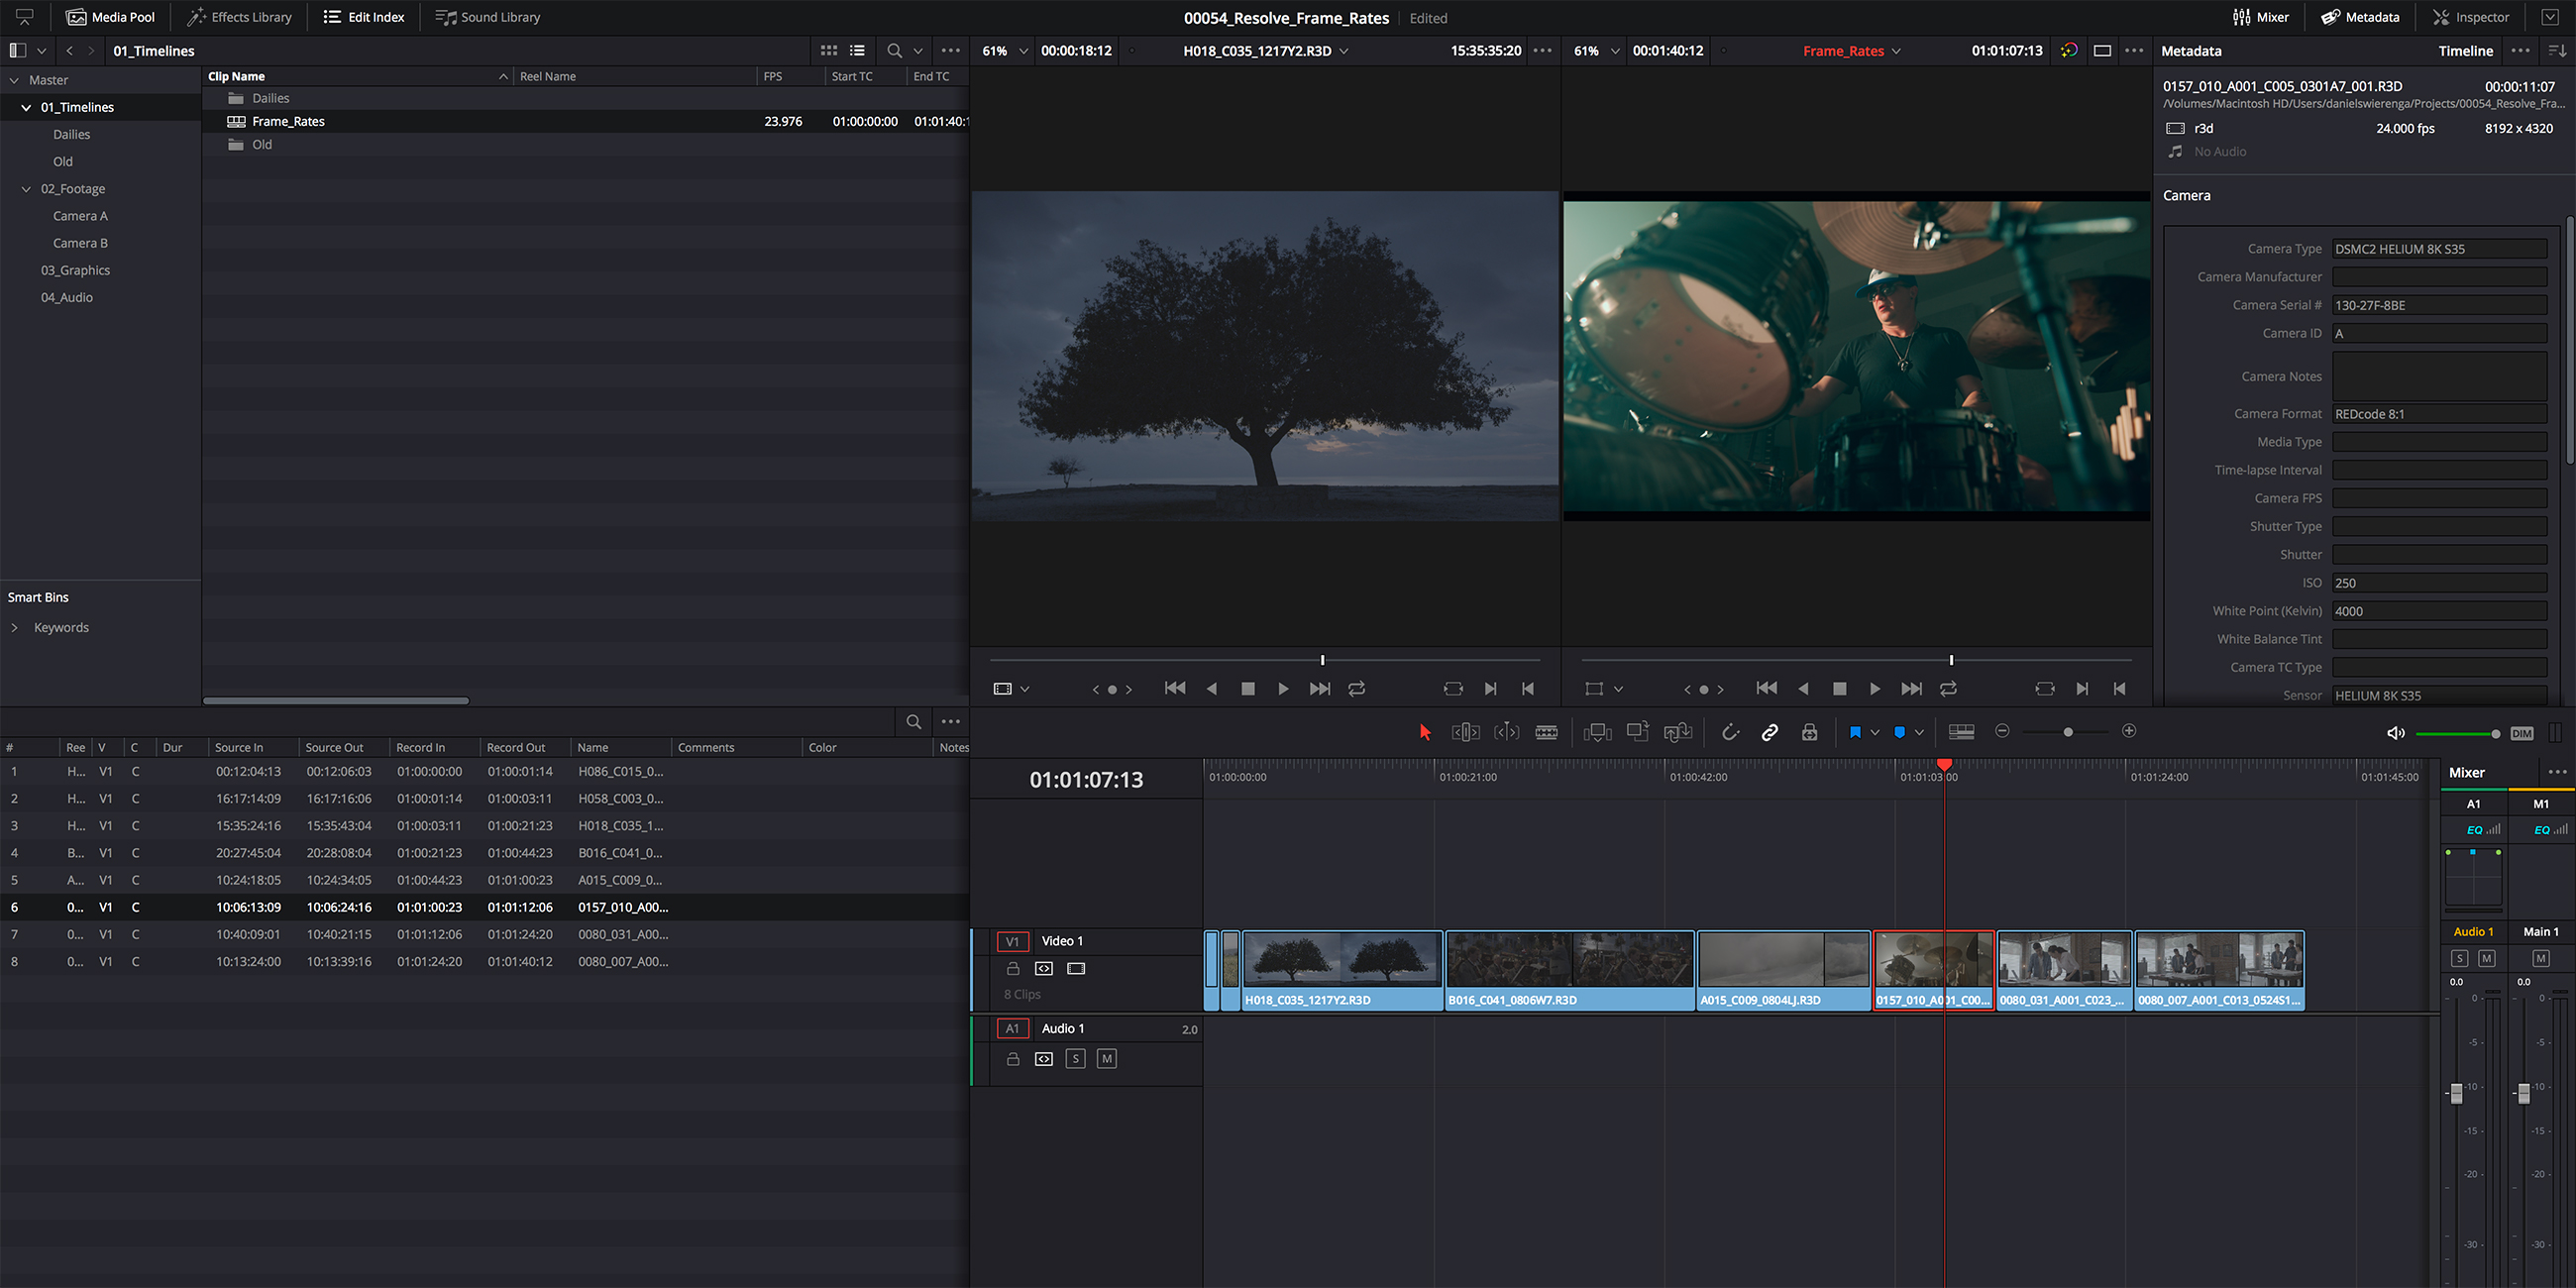 Mixing Frame Rates in DaVinci Resolve – Part 3: Editing and Interpolation